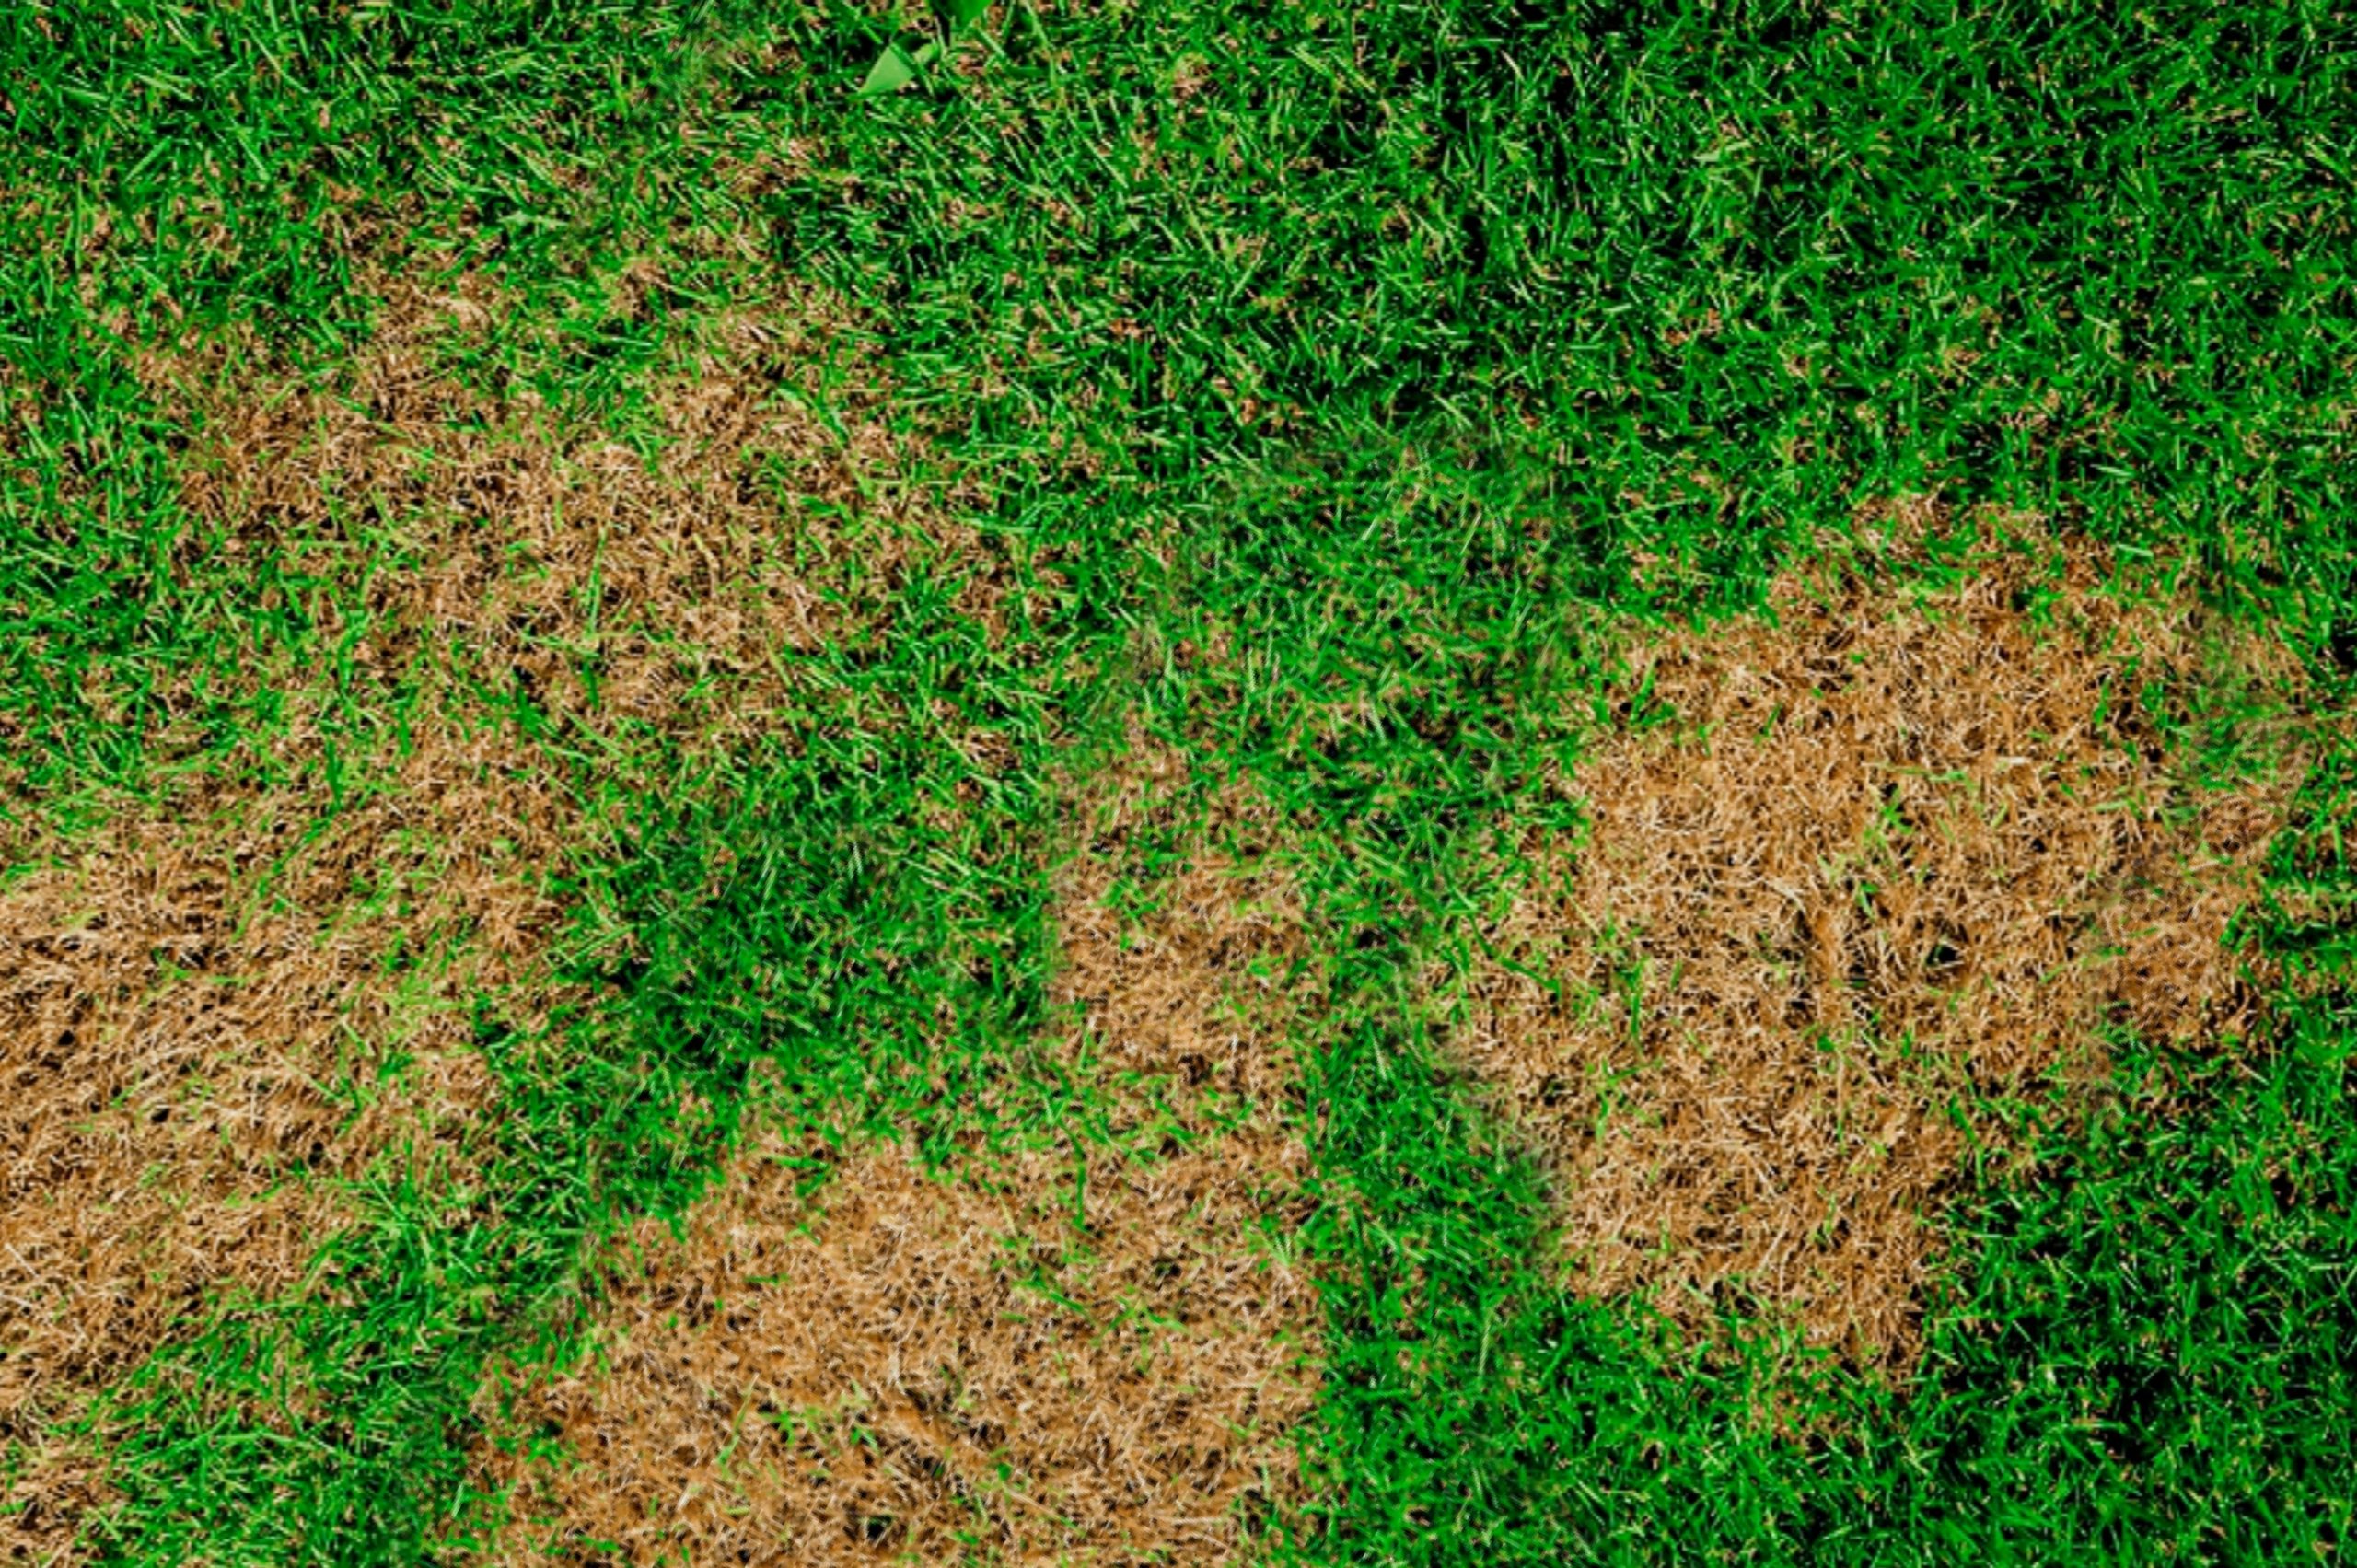 How to to Get Rid of Brown Patch Fungus on Grass